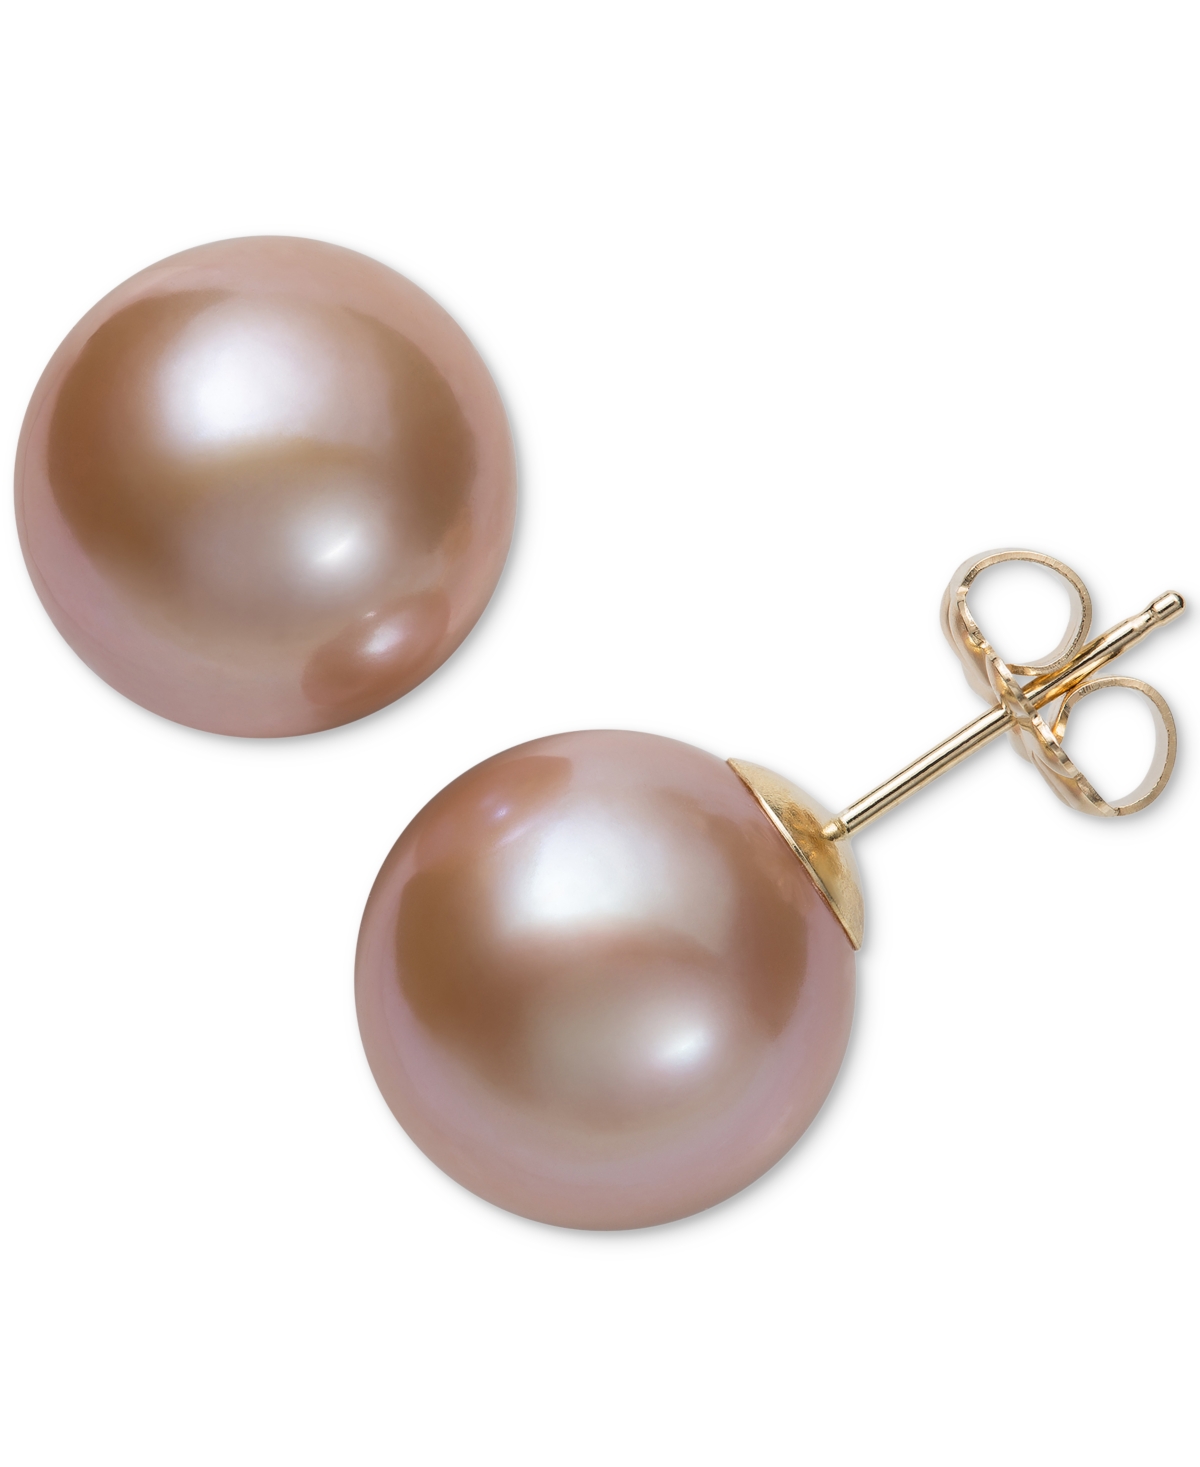 Pink Cultured Freshwater Pearl (11mm) Stud Earrings in 14k Gold, Created for Macy's - Yellow Gold